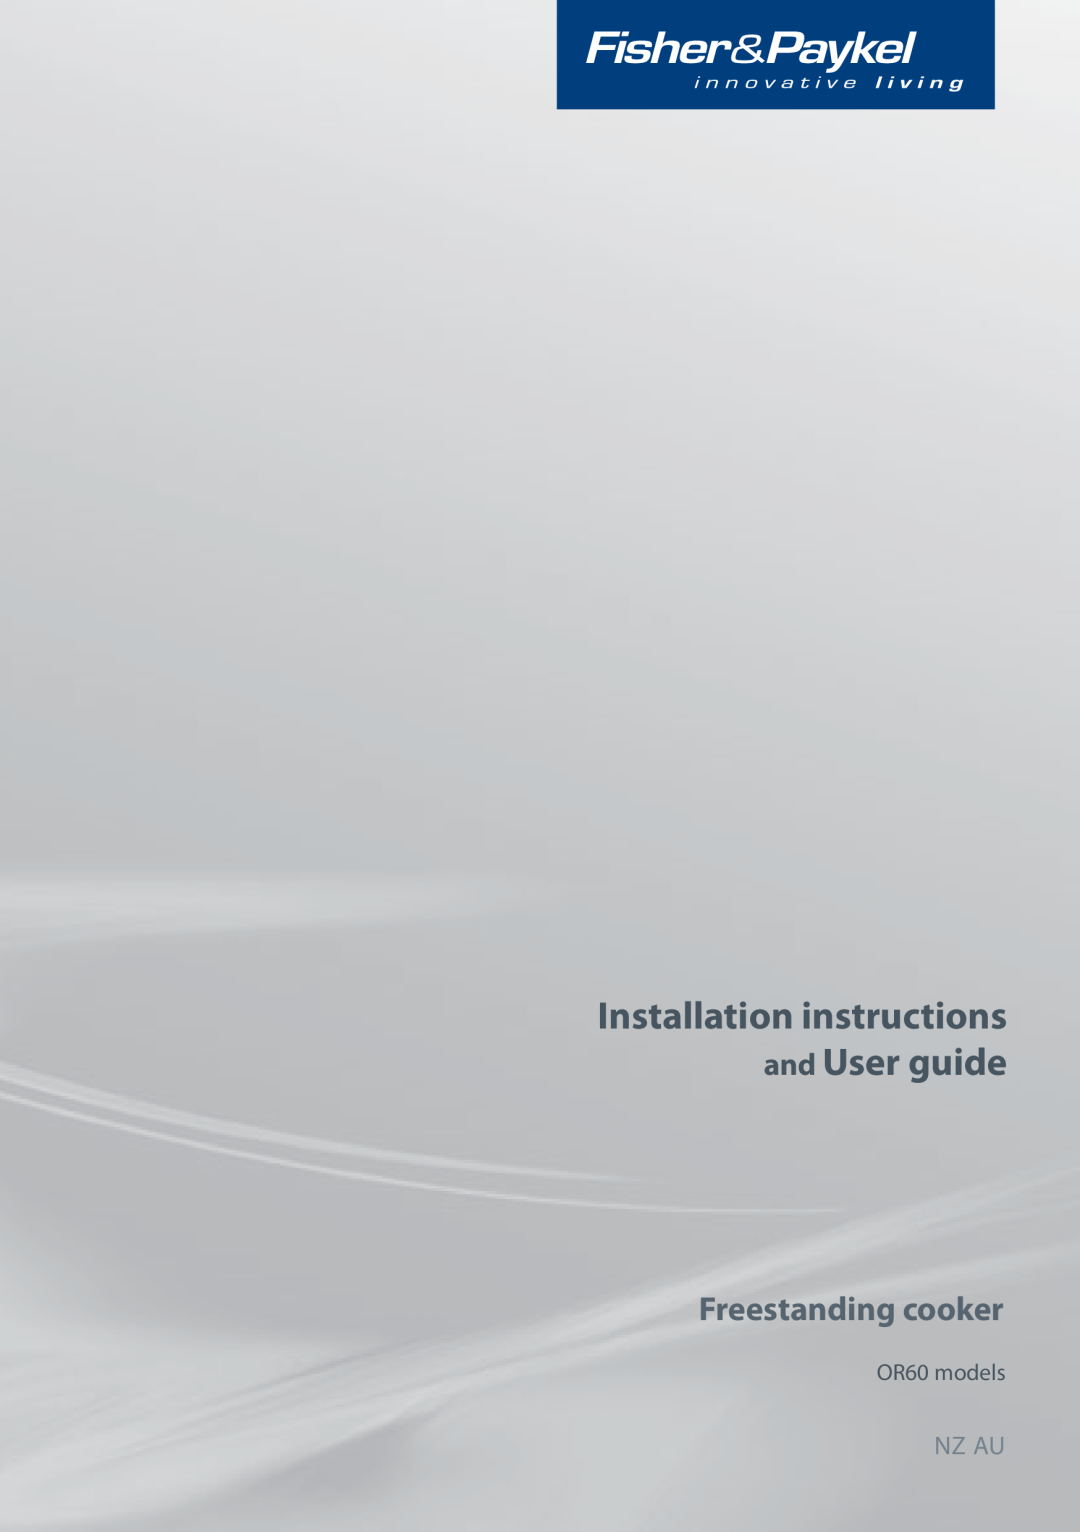 Fisher & Paykel 60 installation instructions Installation instructions and User guide, Freestanding cooker, Nz Au 